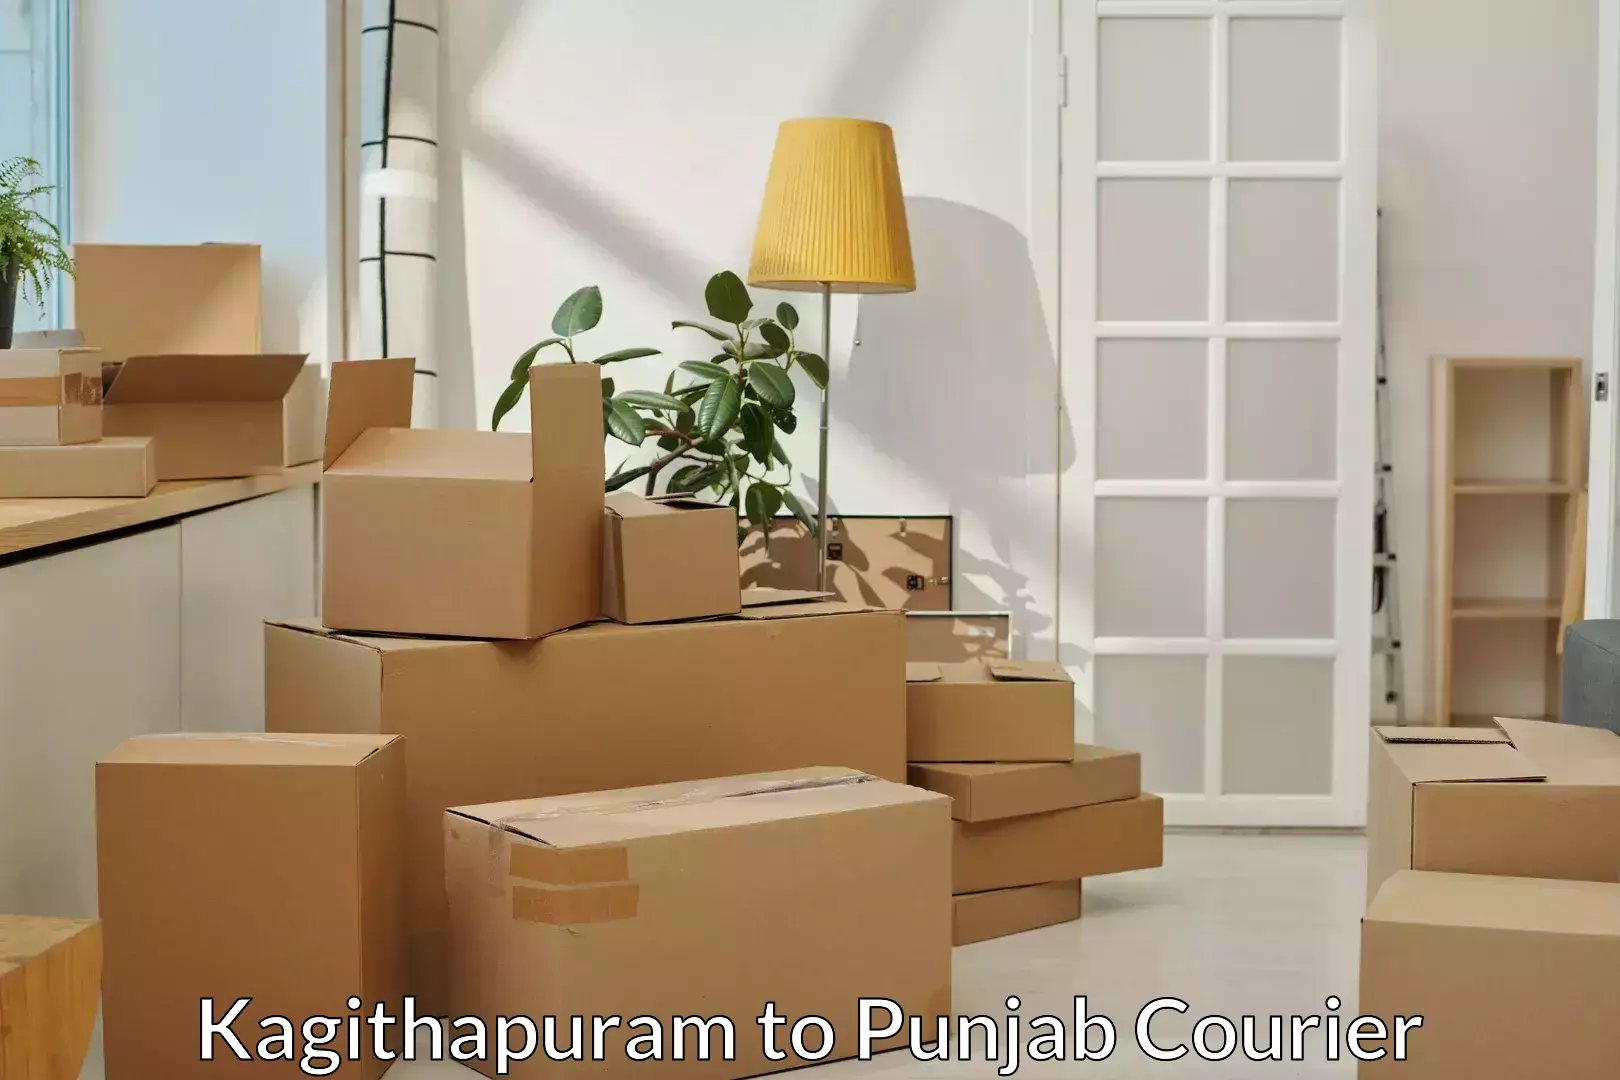 Trusted home movers Kagithapuram to Mohali